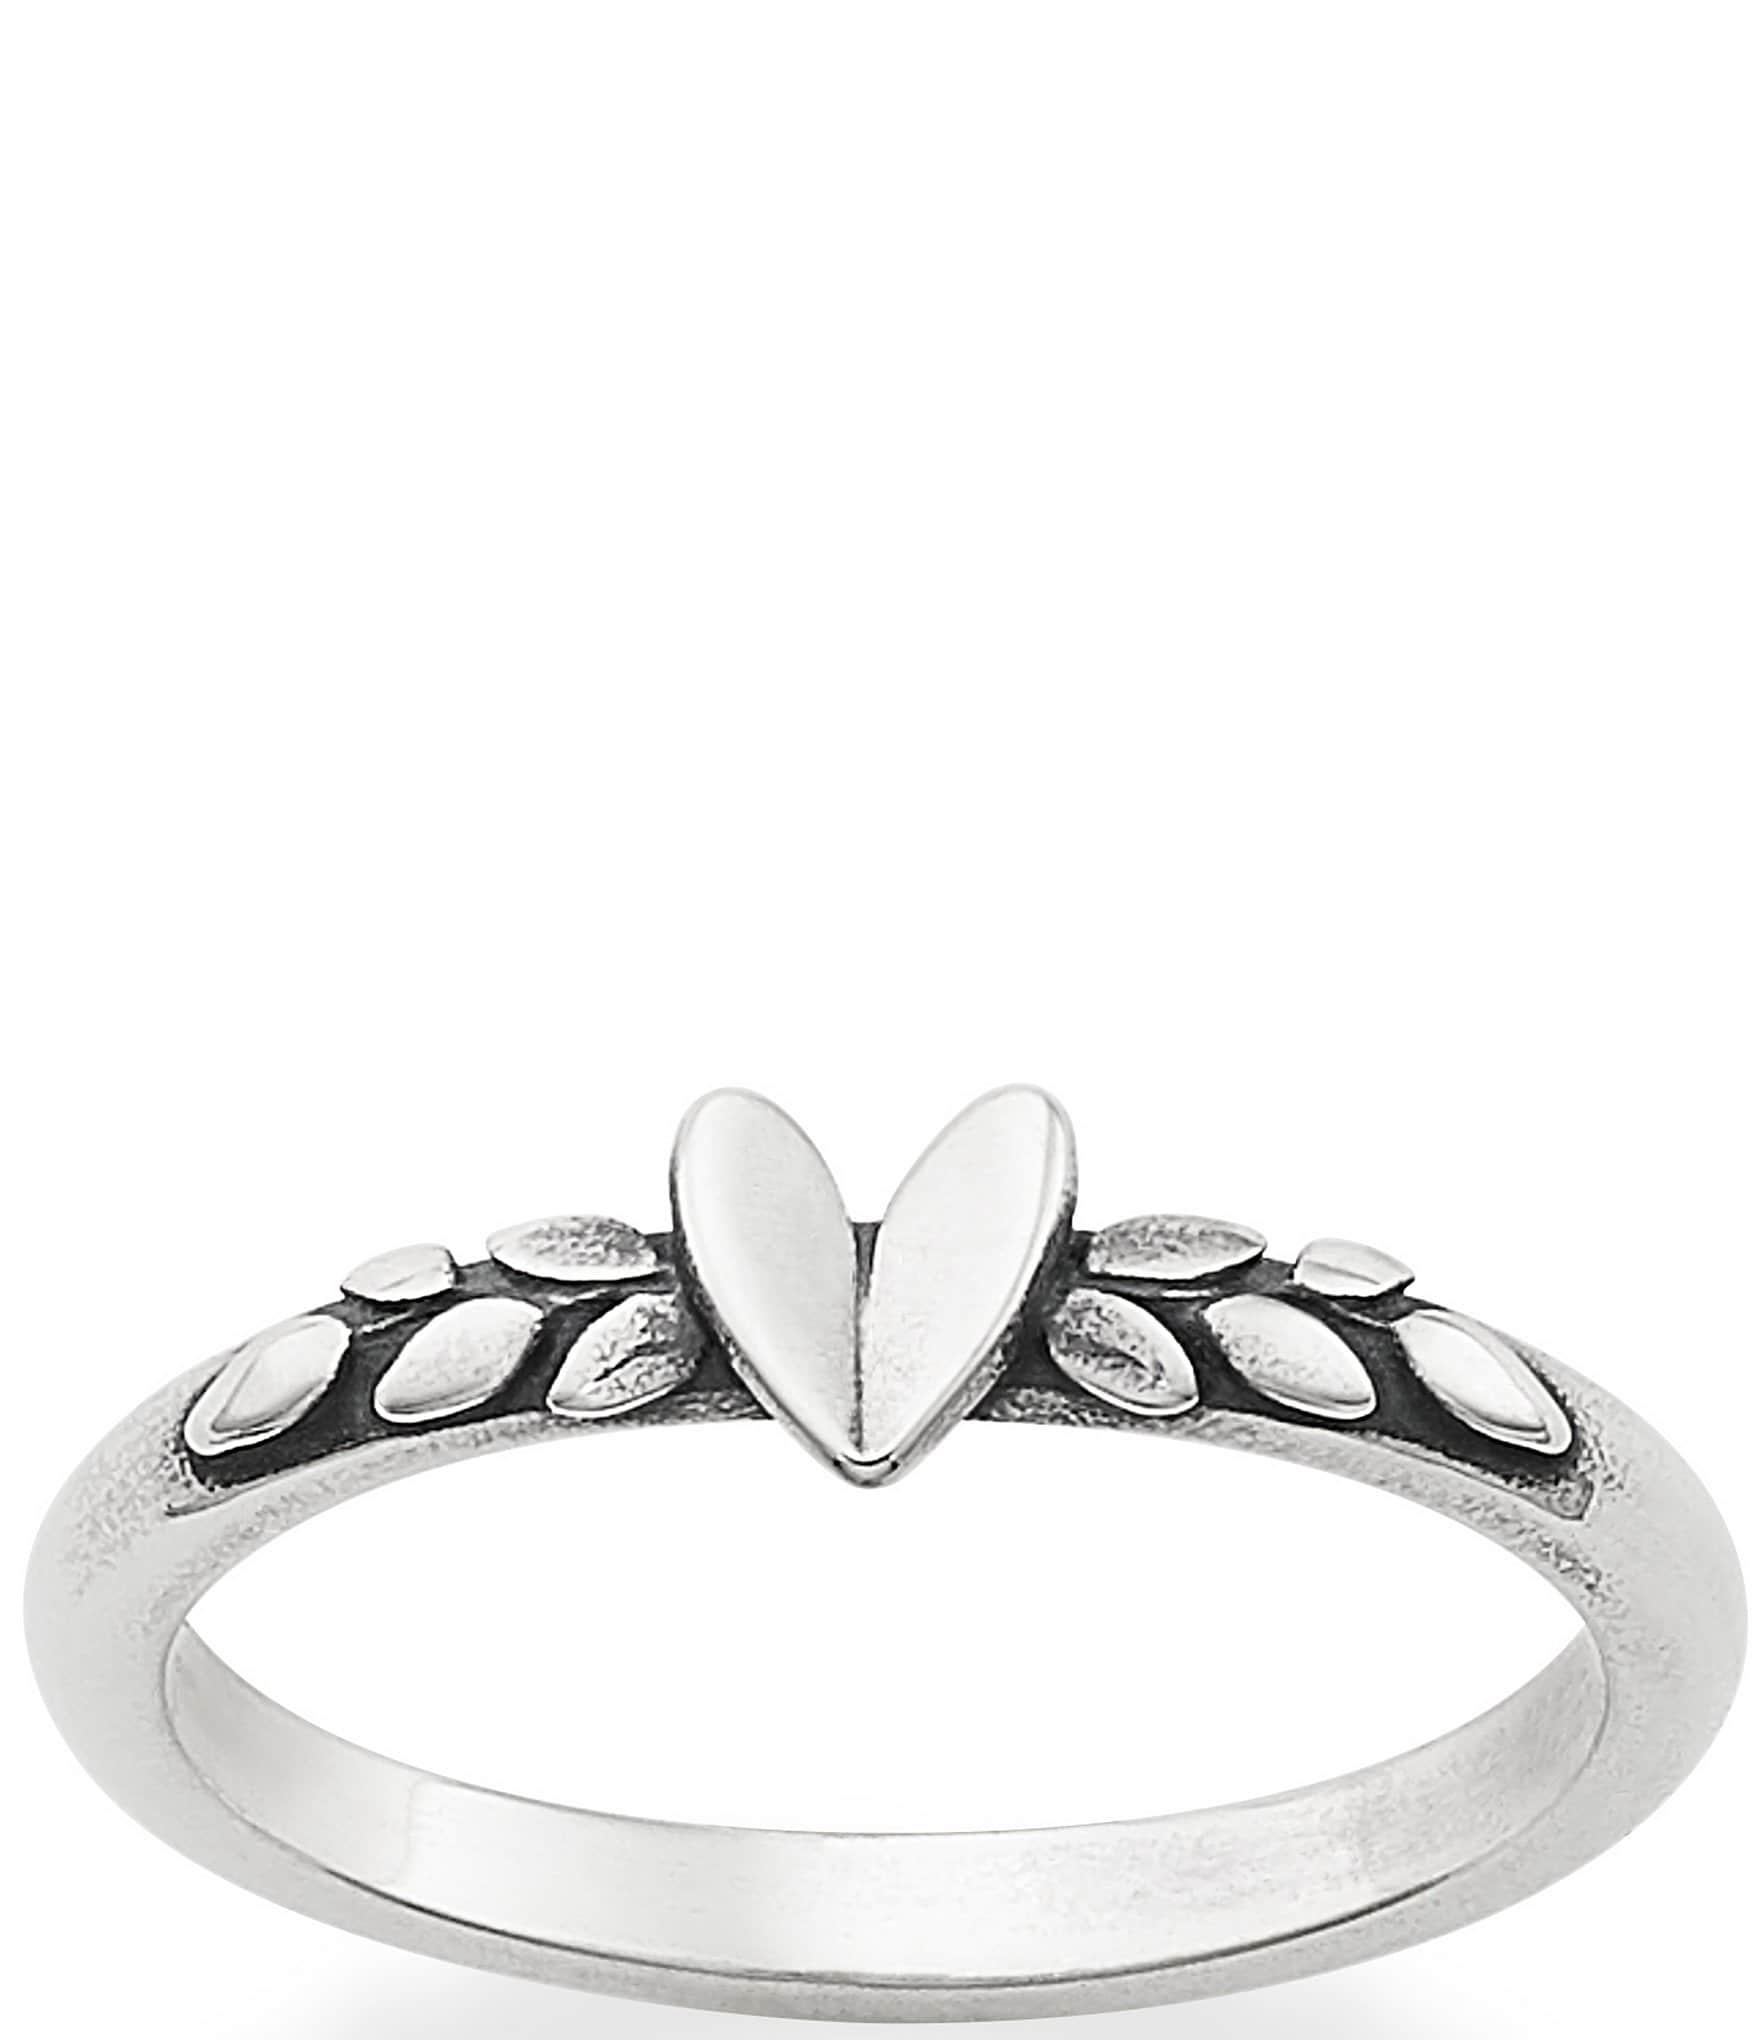 James Avery Sterling Silver Linked Hearts Ring, 5.0 Grams | GovDeals